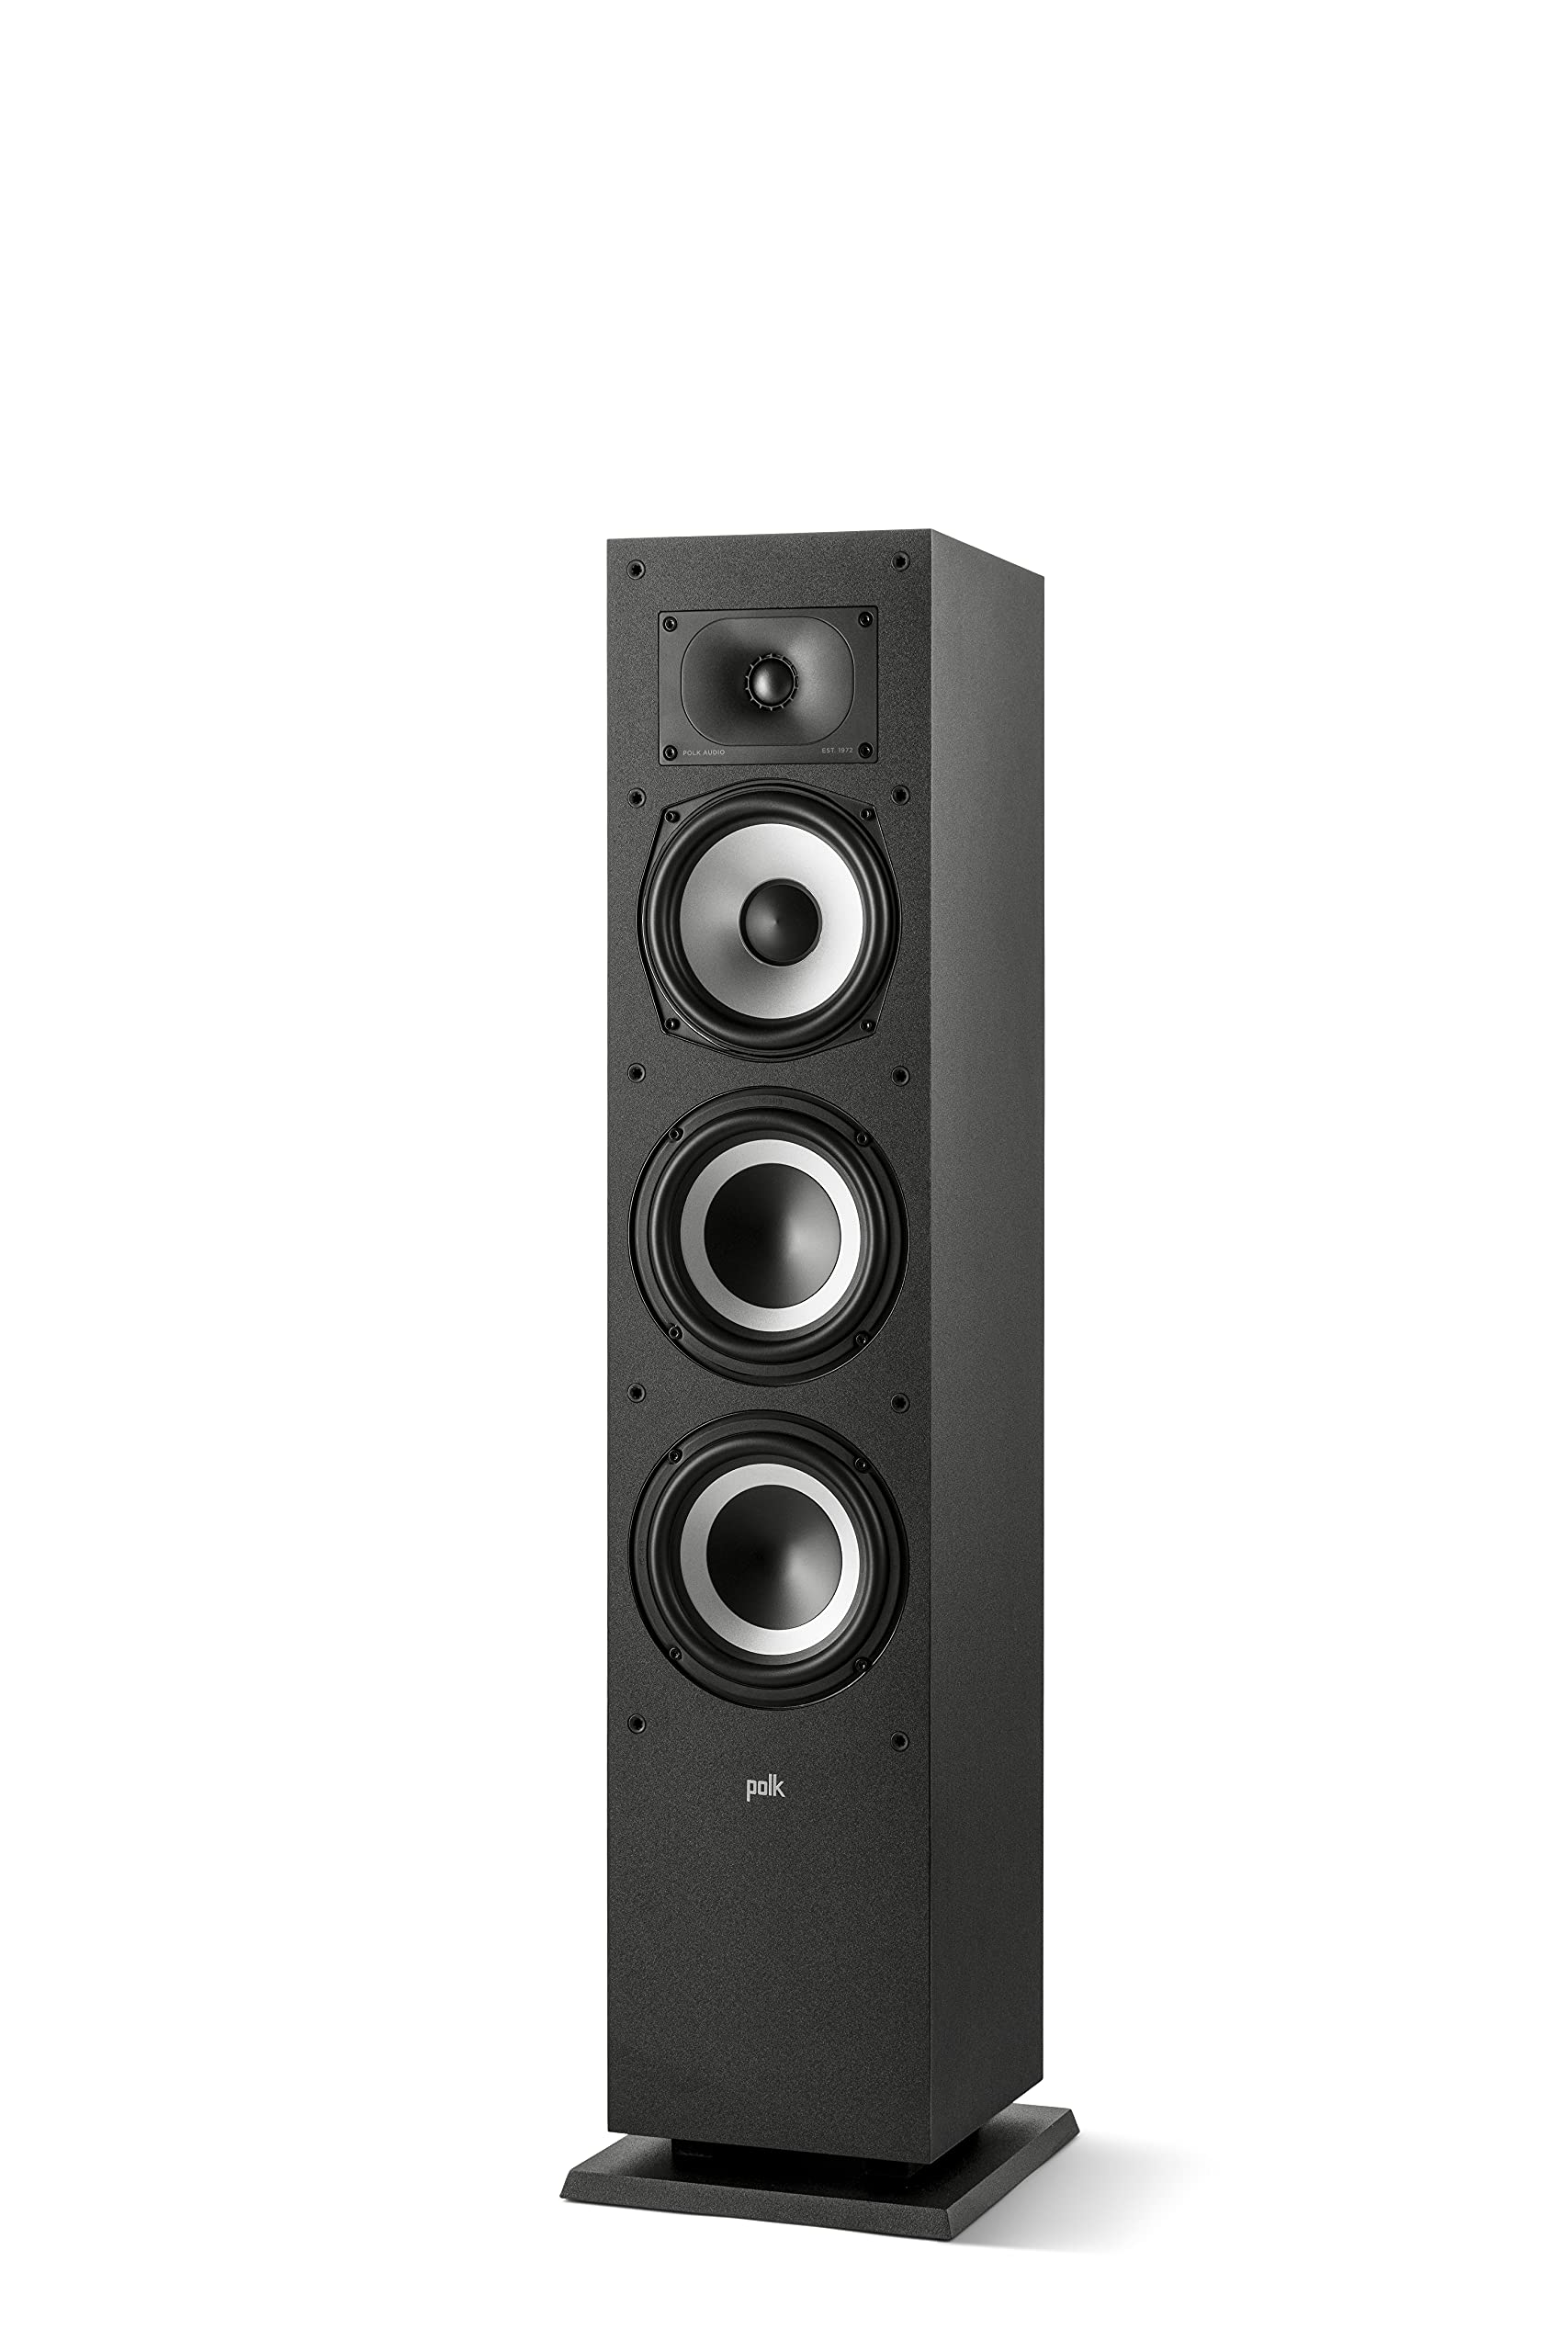  Polk Audio Monitor XT60 Tower Speaker - Hi-Res Audio Certified, Dolby Atmos, DTS:X & Auro 3D Compatible, 1